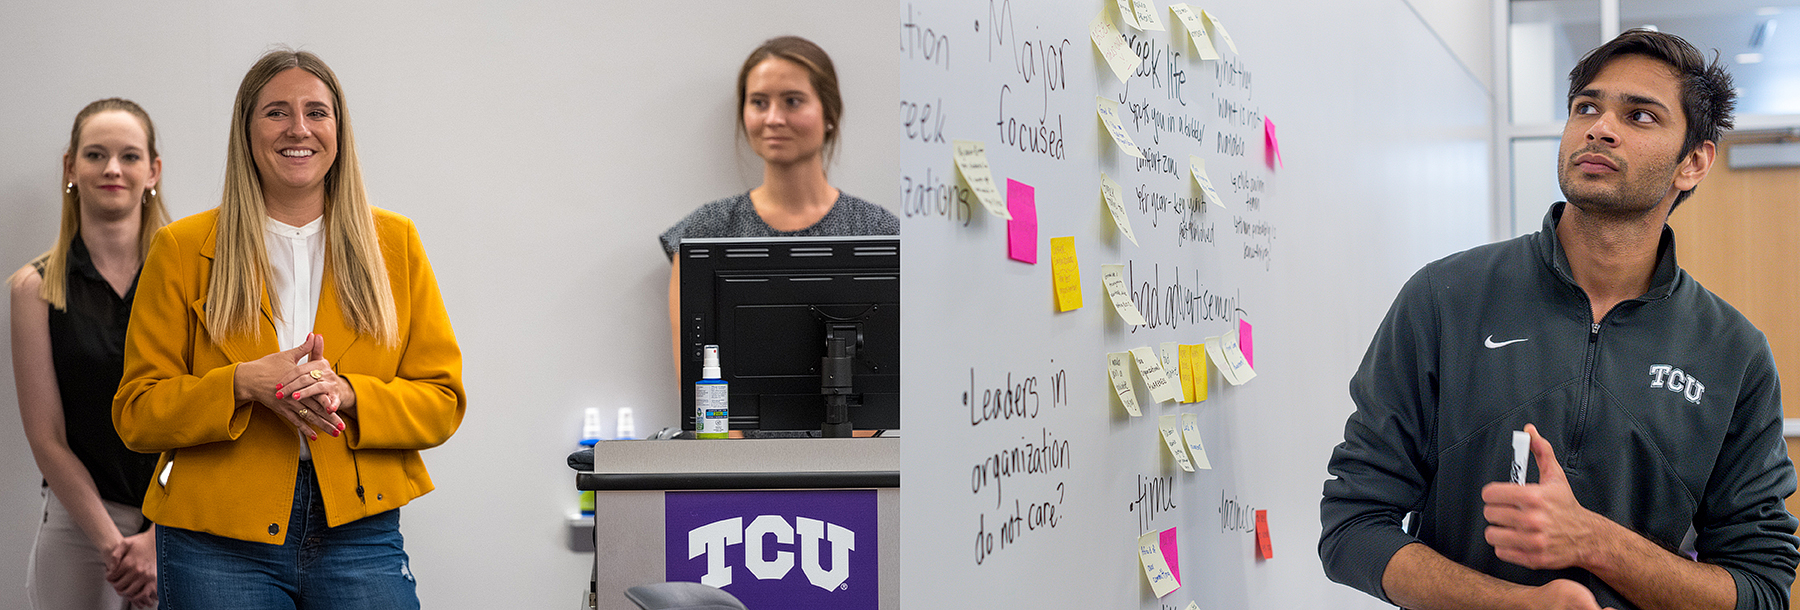 Section Image: Three female students giving a presentation, a student standing at a white board with writing and post-it notes. 